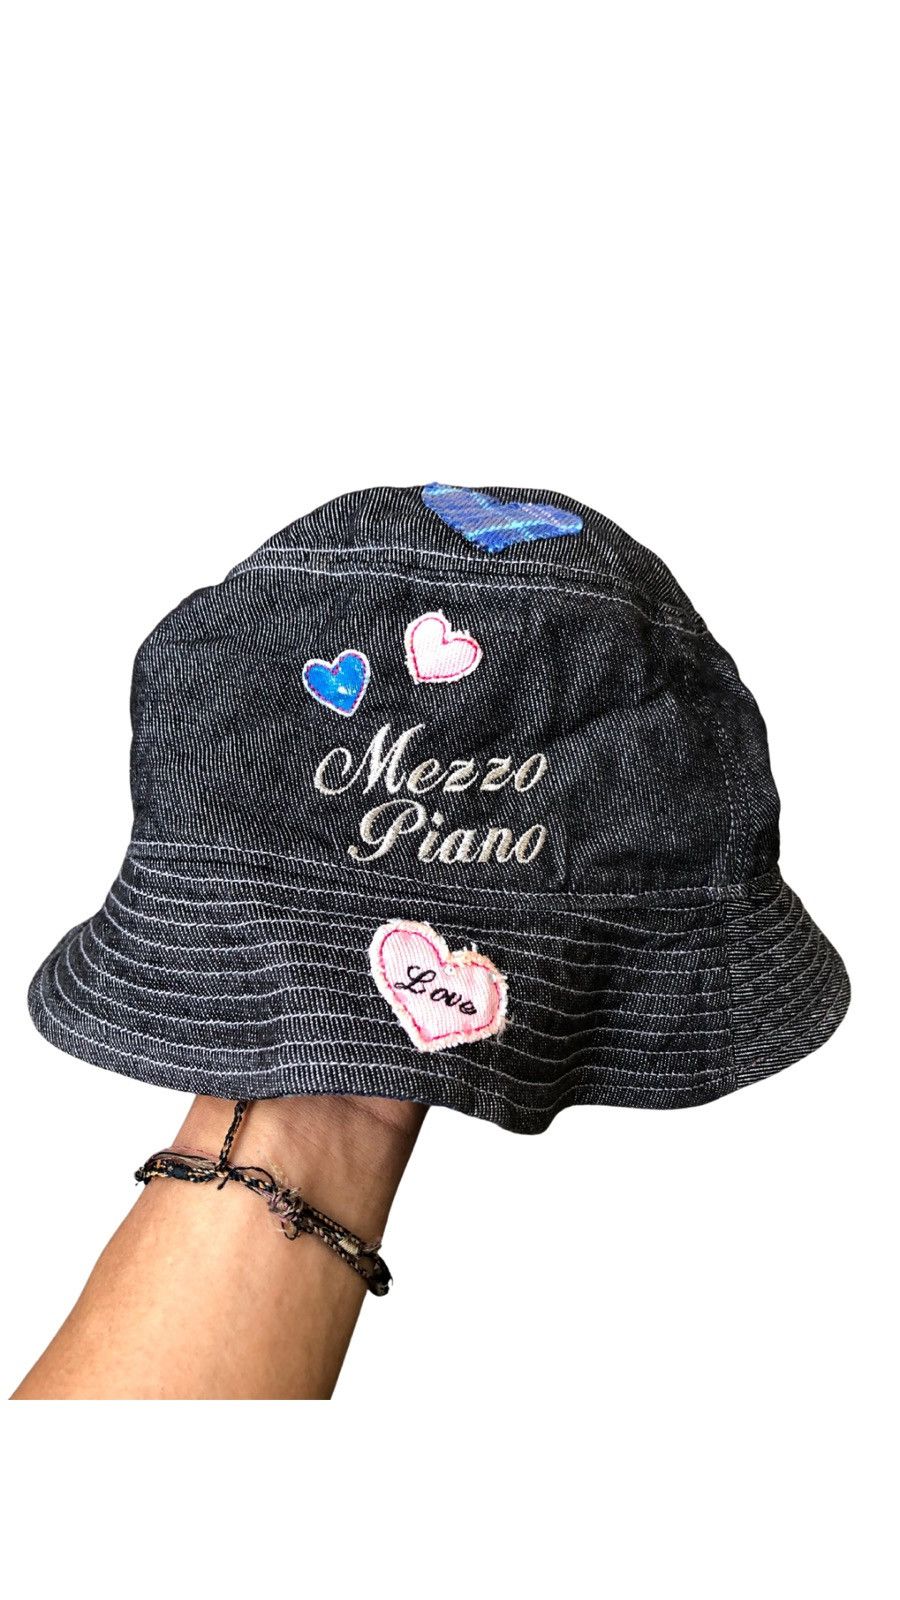 Hysteric Glamour SAMPLE Mezzo Piano Love Bucket Hat Size ONE SIZE - 1 Preview